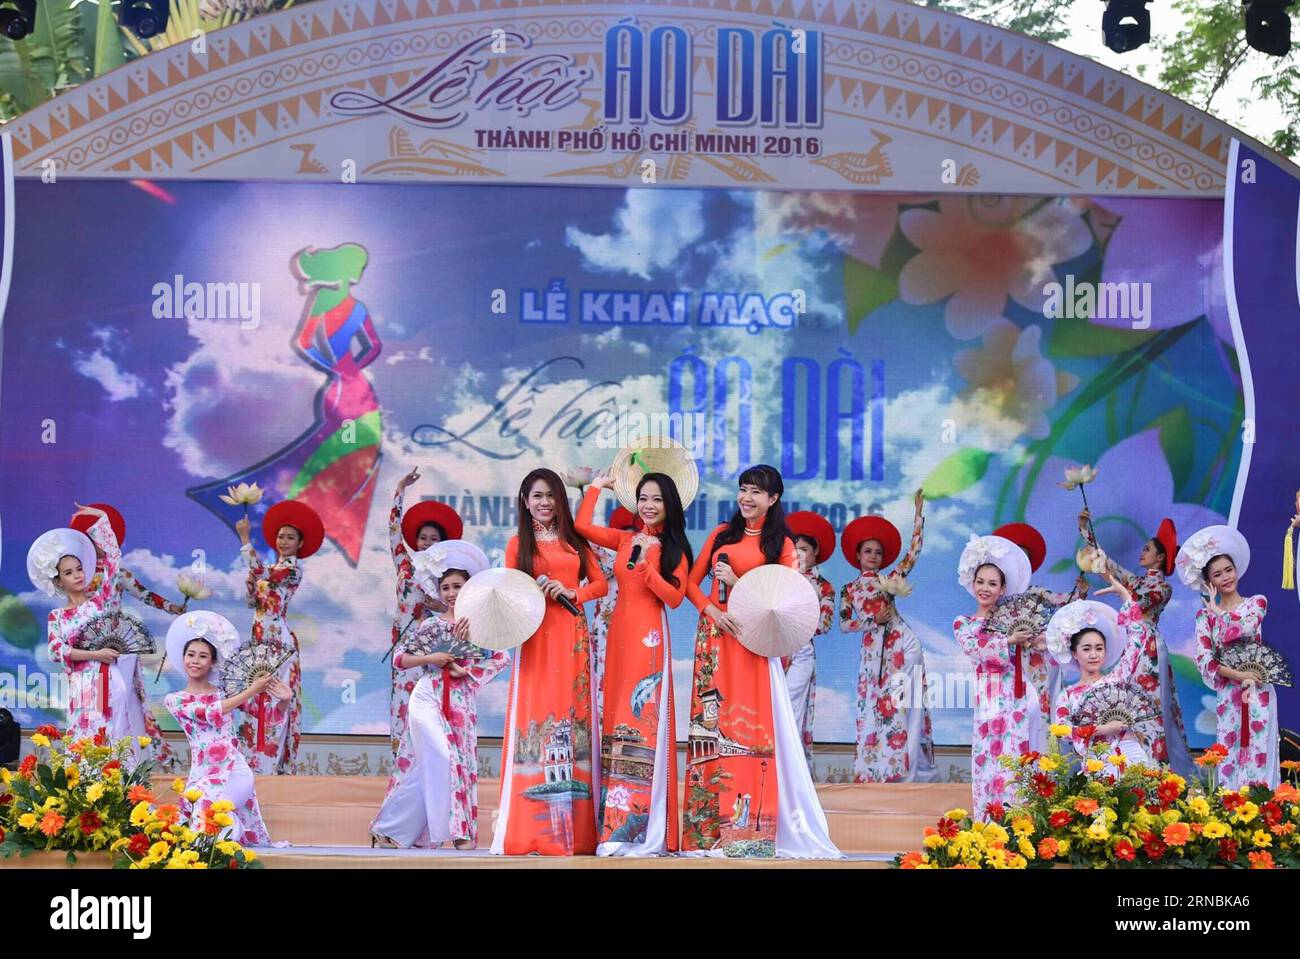 (160308) -- HO CHI MINH CITY, March 8, 2016 -- Vietnamese performers wearing ao dai sing and dance during the Ao Dai Festival 2016 in Ho Chi Minh city, Vietnam, March 8, 2016. Ao Dai Festival 2016 kicked off on Tuesday, featuring music performances, parade, exhibitions, fair, talk shows and contests related to the traditional long dress worn by Vietnamese women. )(azp) VIETNAM-HO CHI MINH CITY-AO DAI FESTIVAL 2016 NguyenxLexHuyen PUBLICATIONxNOTxINxCHN   Ho Chi Minh City March 8 2016 Vietnamese Performers Wearing Ao Dai Sing and Dance during The Ao Dai Festival 2016 in Ho Chi Minh City Vietnam Stock Photo